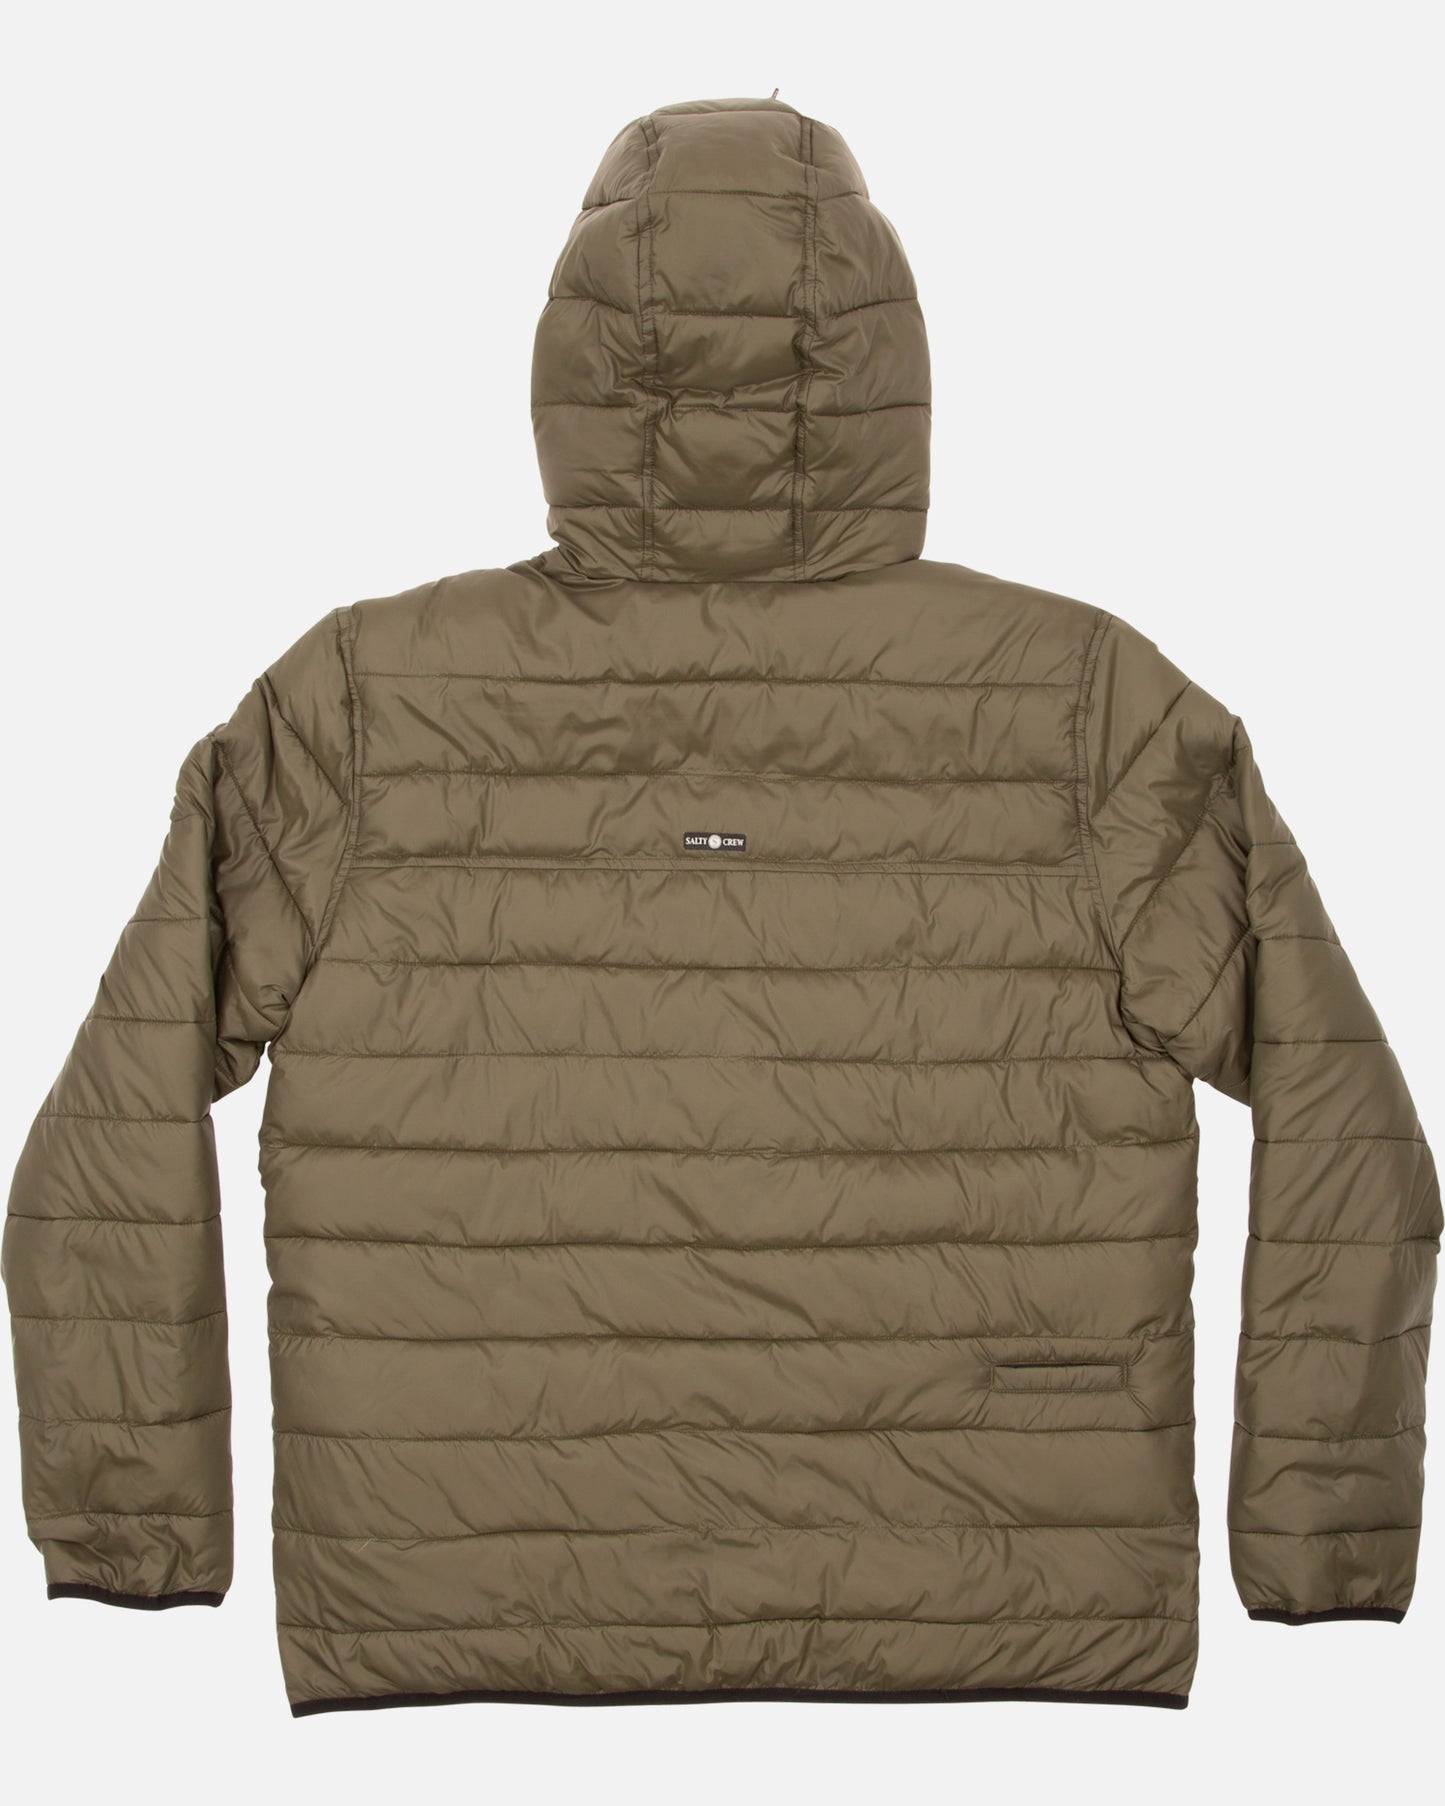 Barrier Jacket - Military